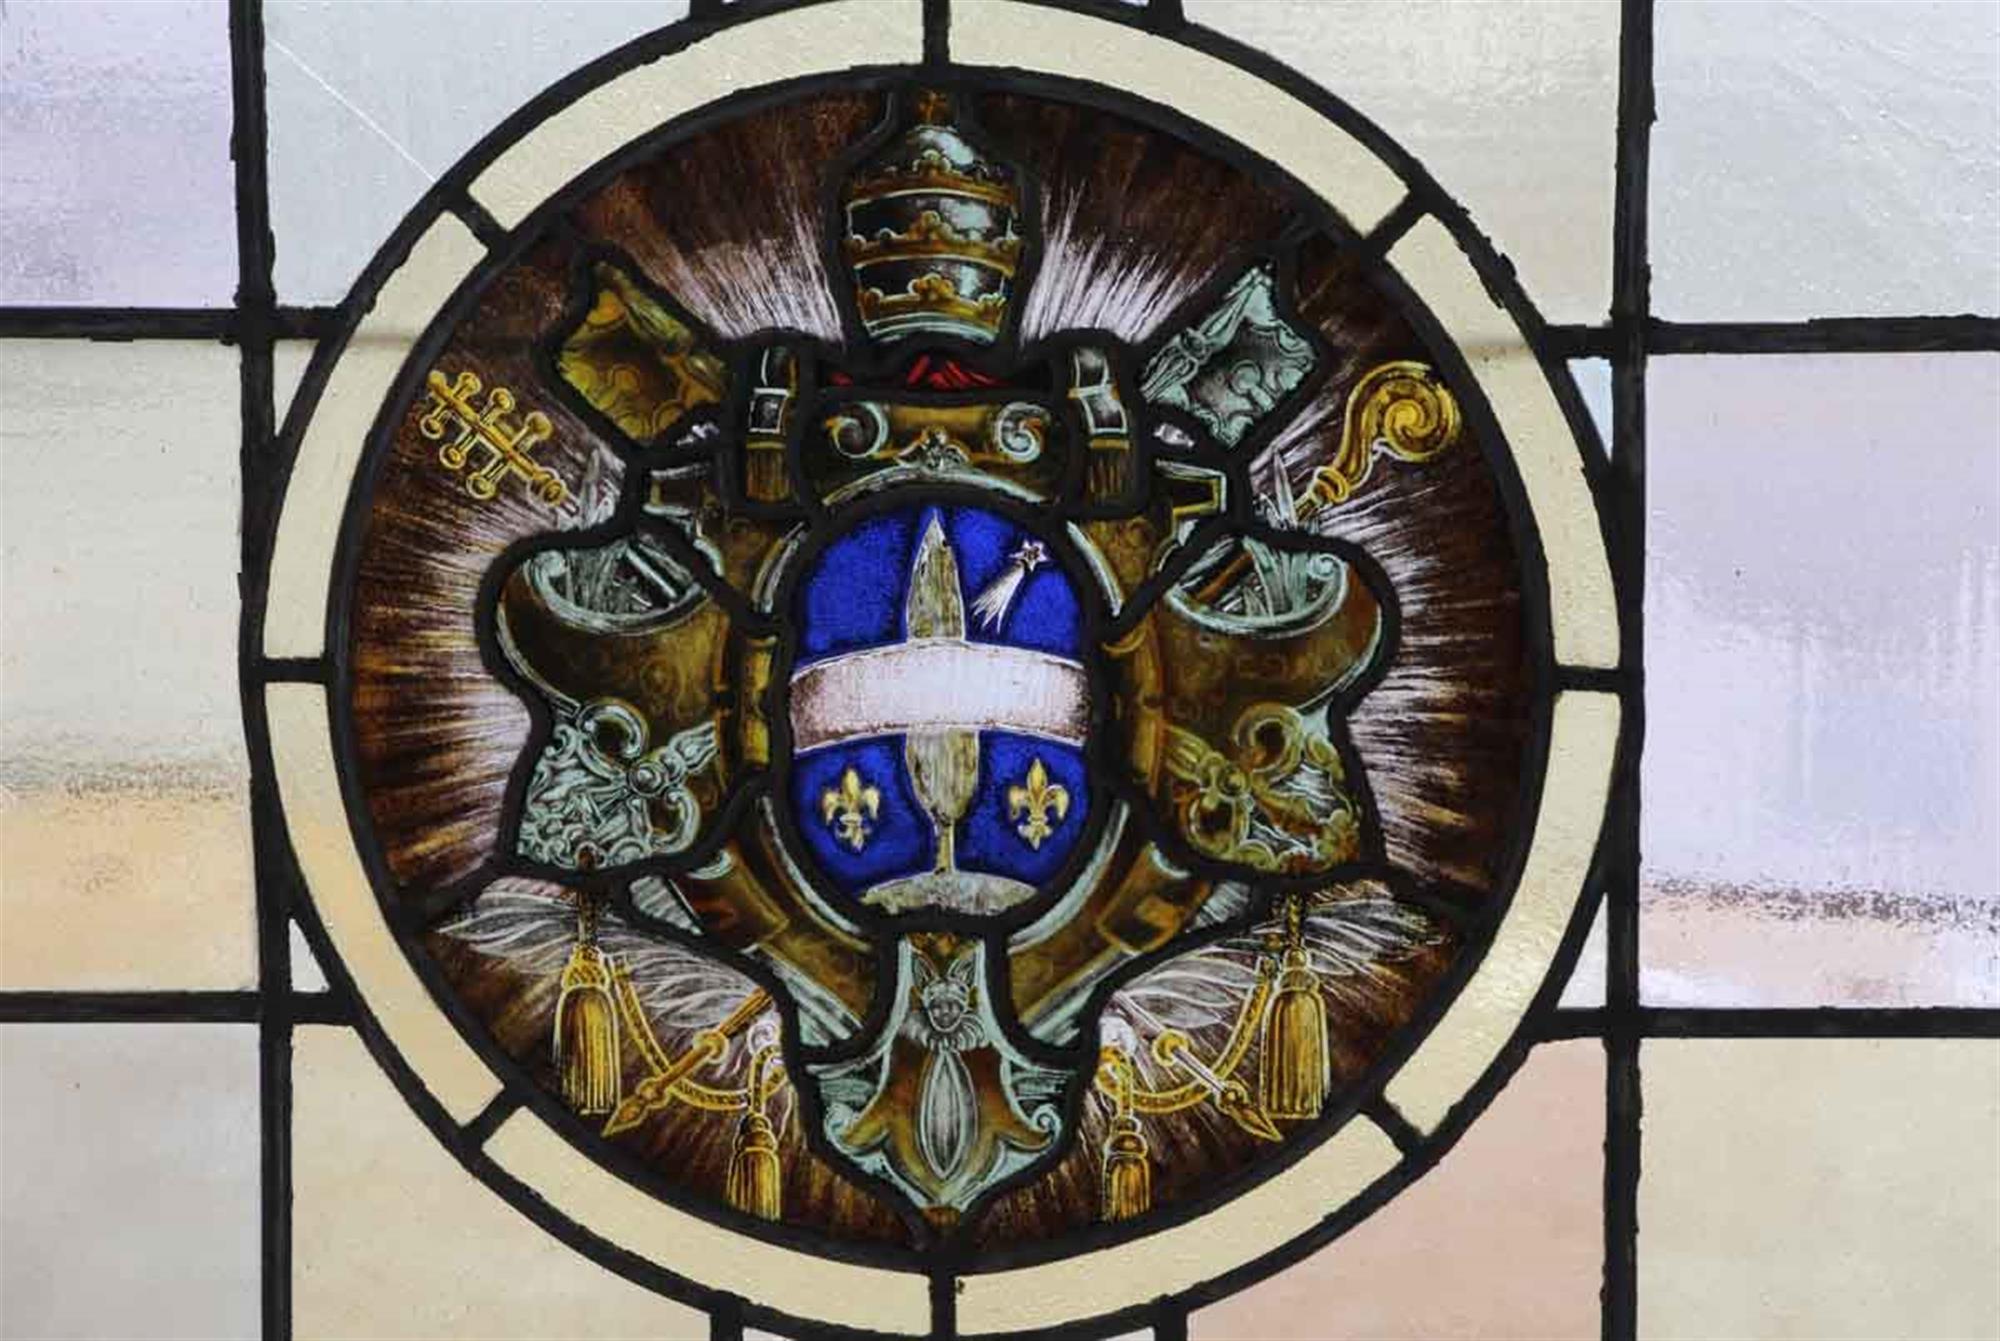 Wood framed 1910 Arts & Crafts stained glass window with a center painted shield, fleur-de-lis and shooting star motif detail. One pane of glass just outside the circle has a stress crack. This can be seen at our 302 Bowery location in Manhattan.